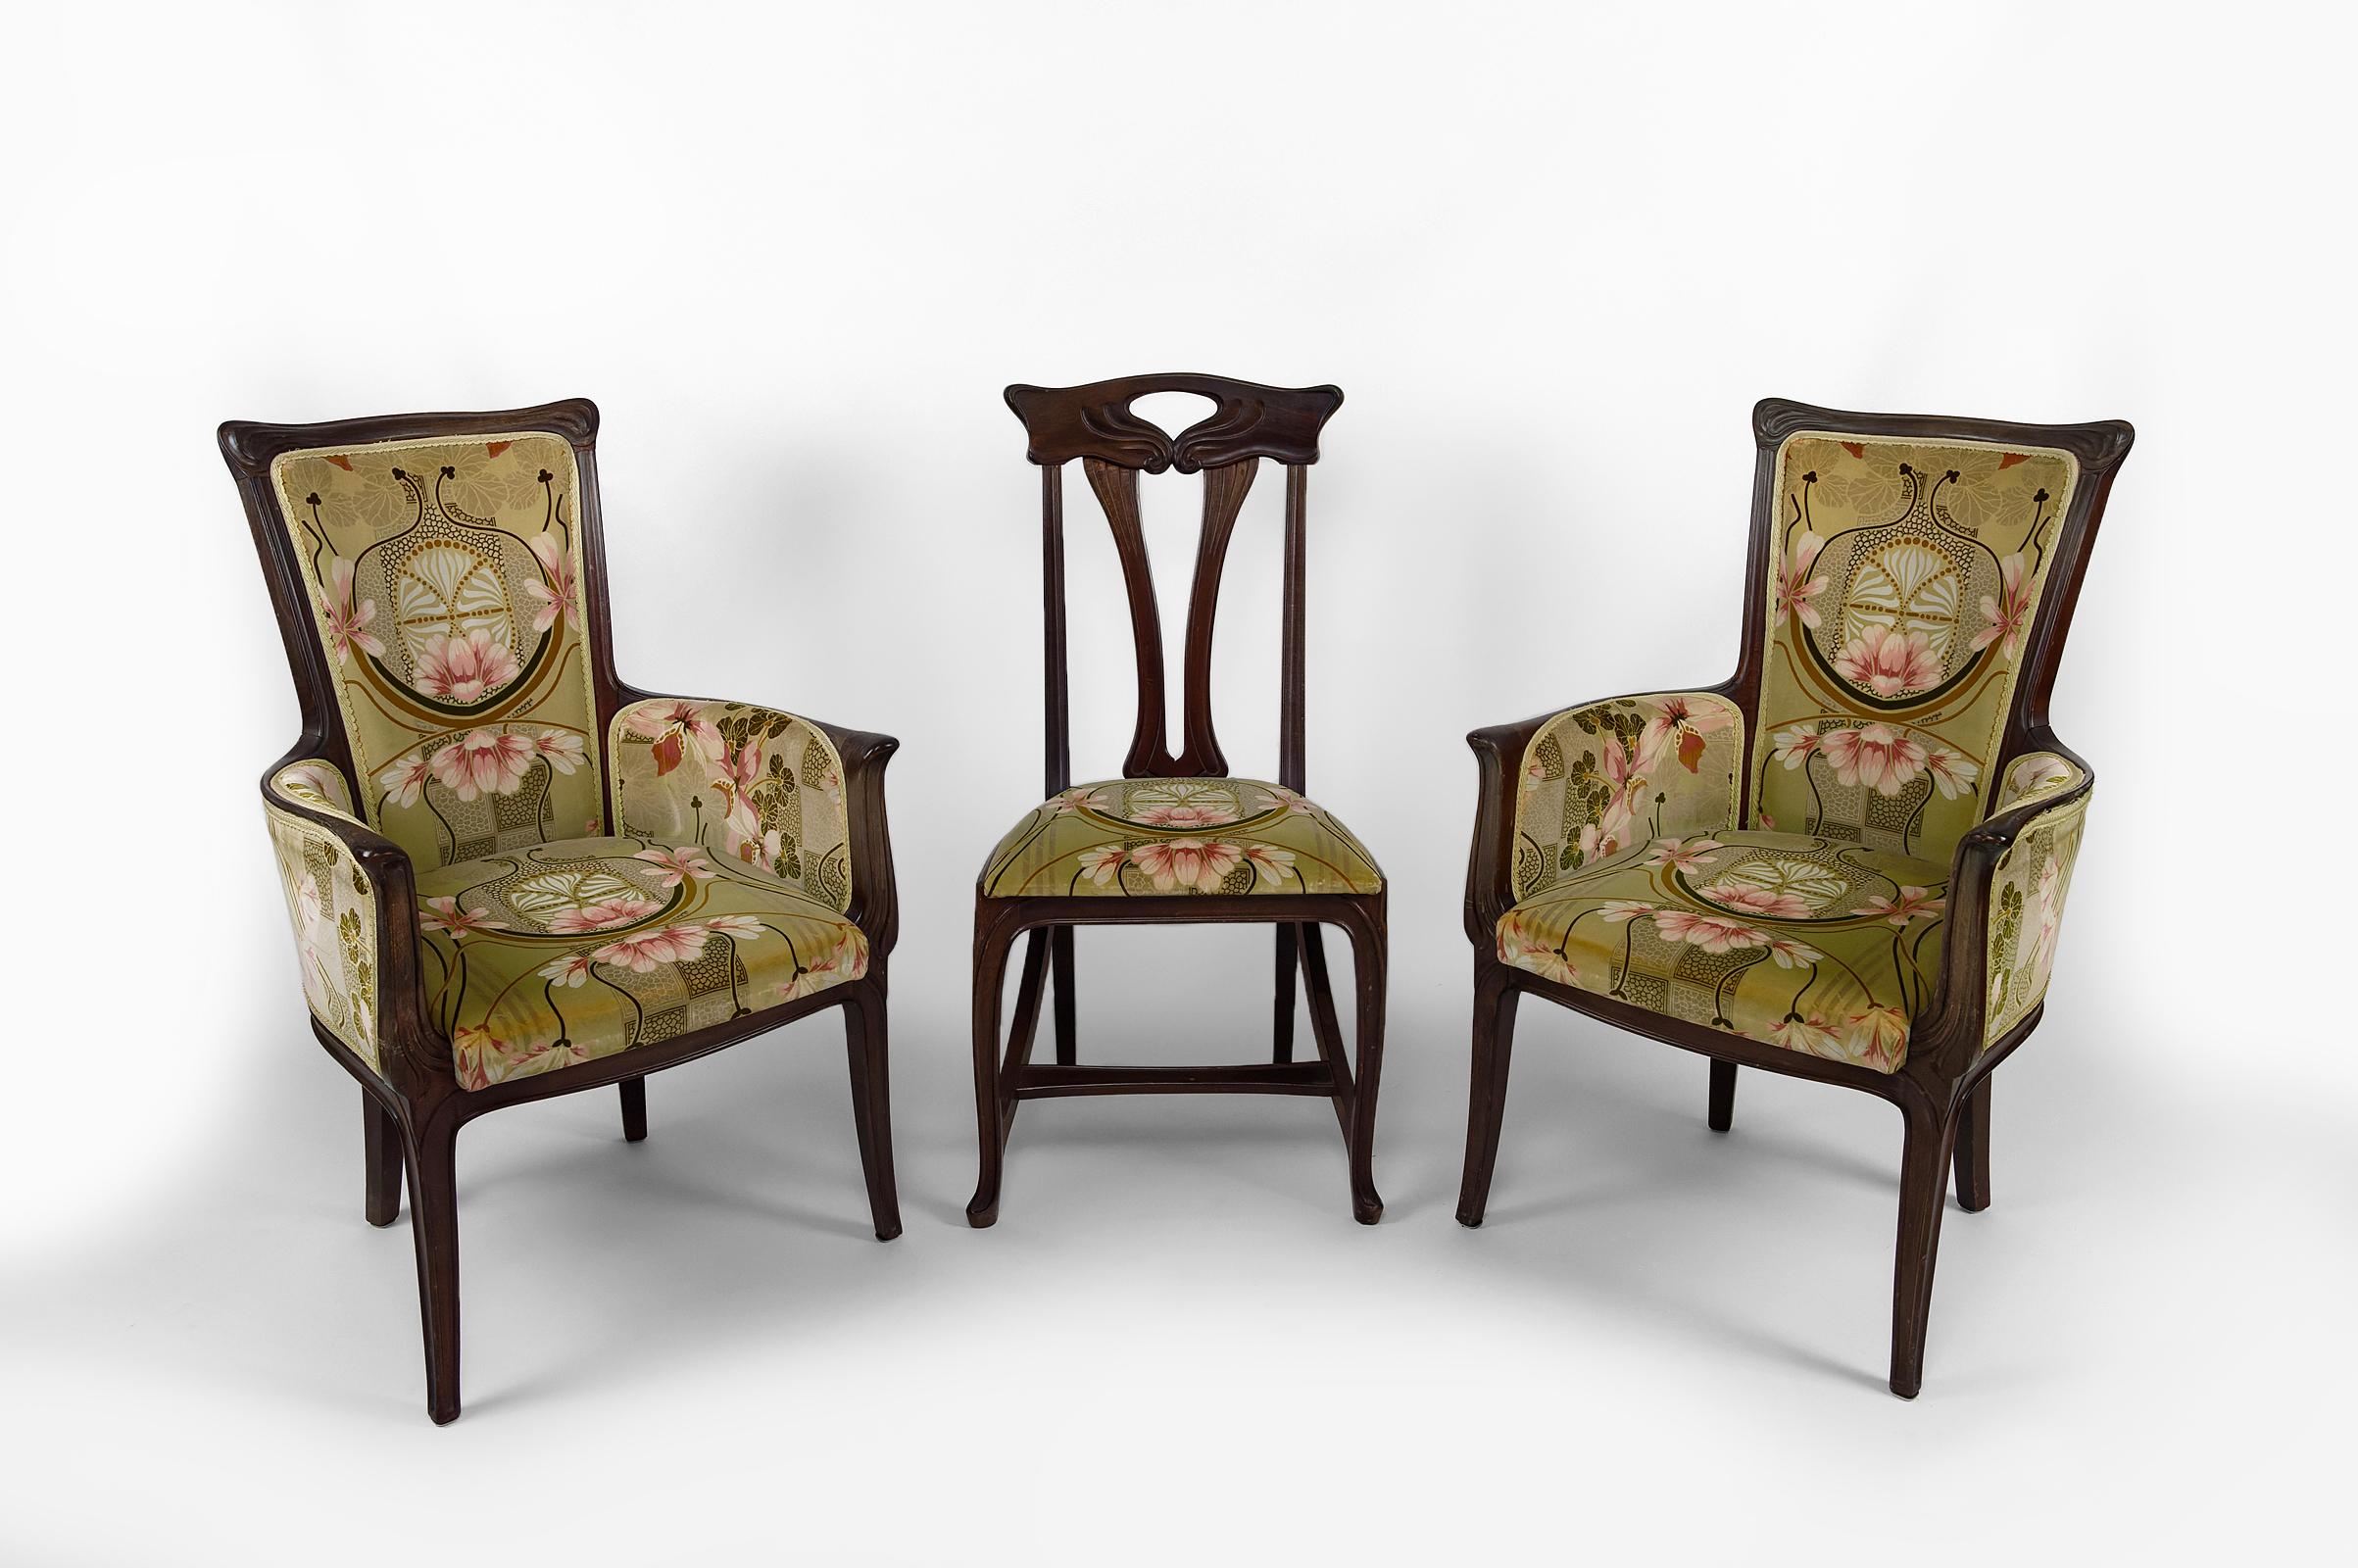 Attributed to Eugène Gaillard

Eugène Gaillard, born January 31, 1862 in Paris, where he died January 27, 1931, is an architect and furniture designer. He was one of the most renowned Art Nouveau decorative artists.

- 2 wing chairs /